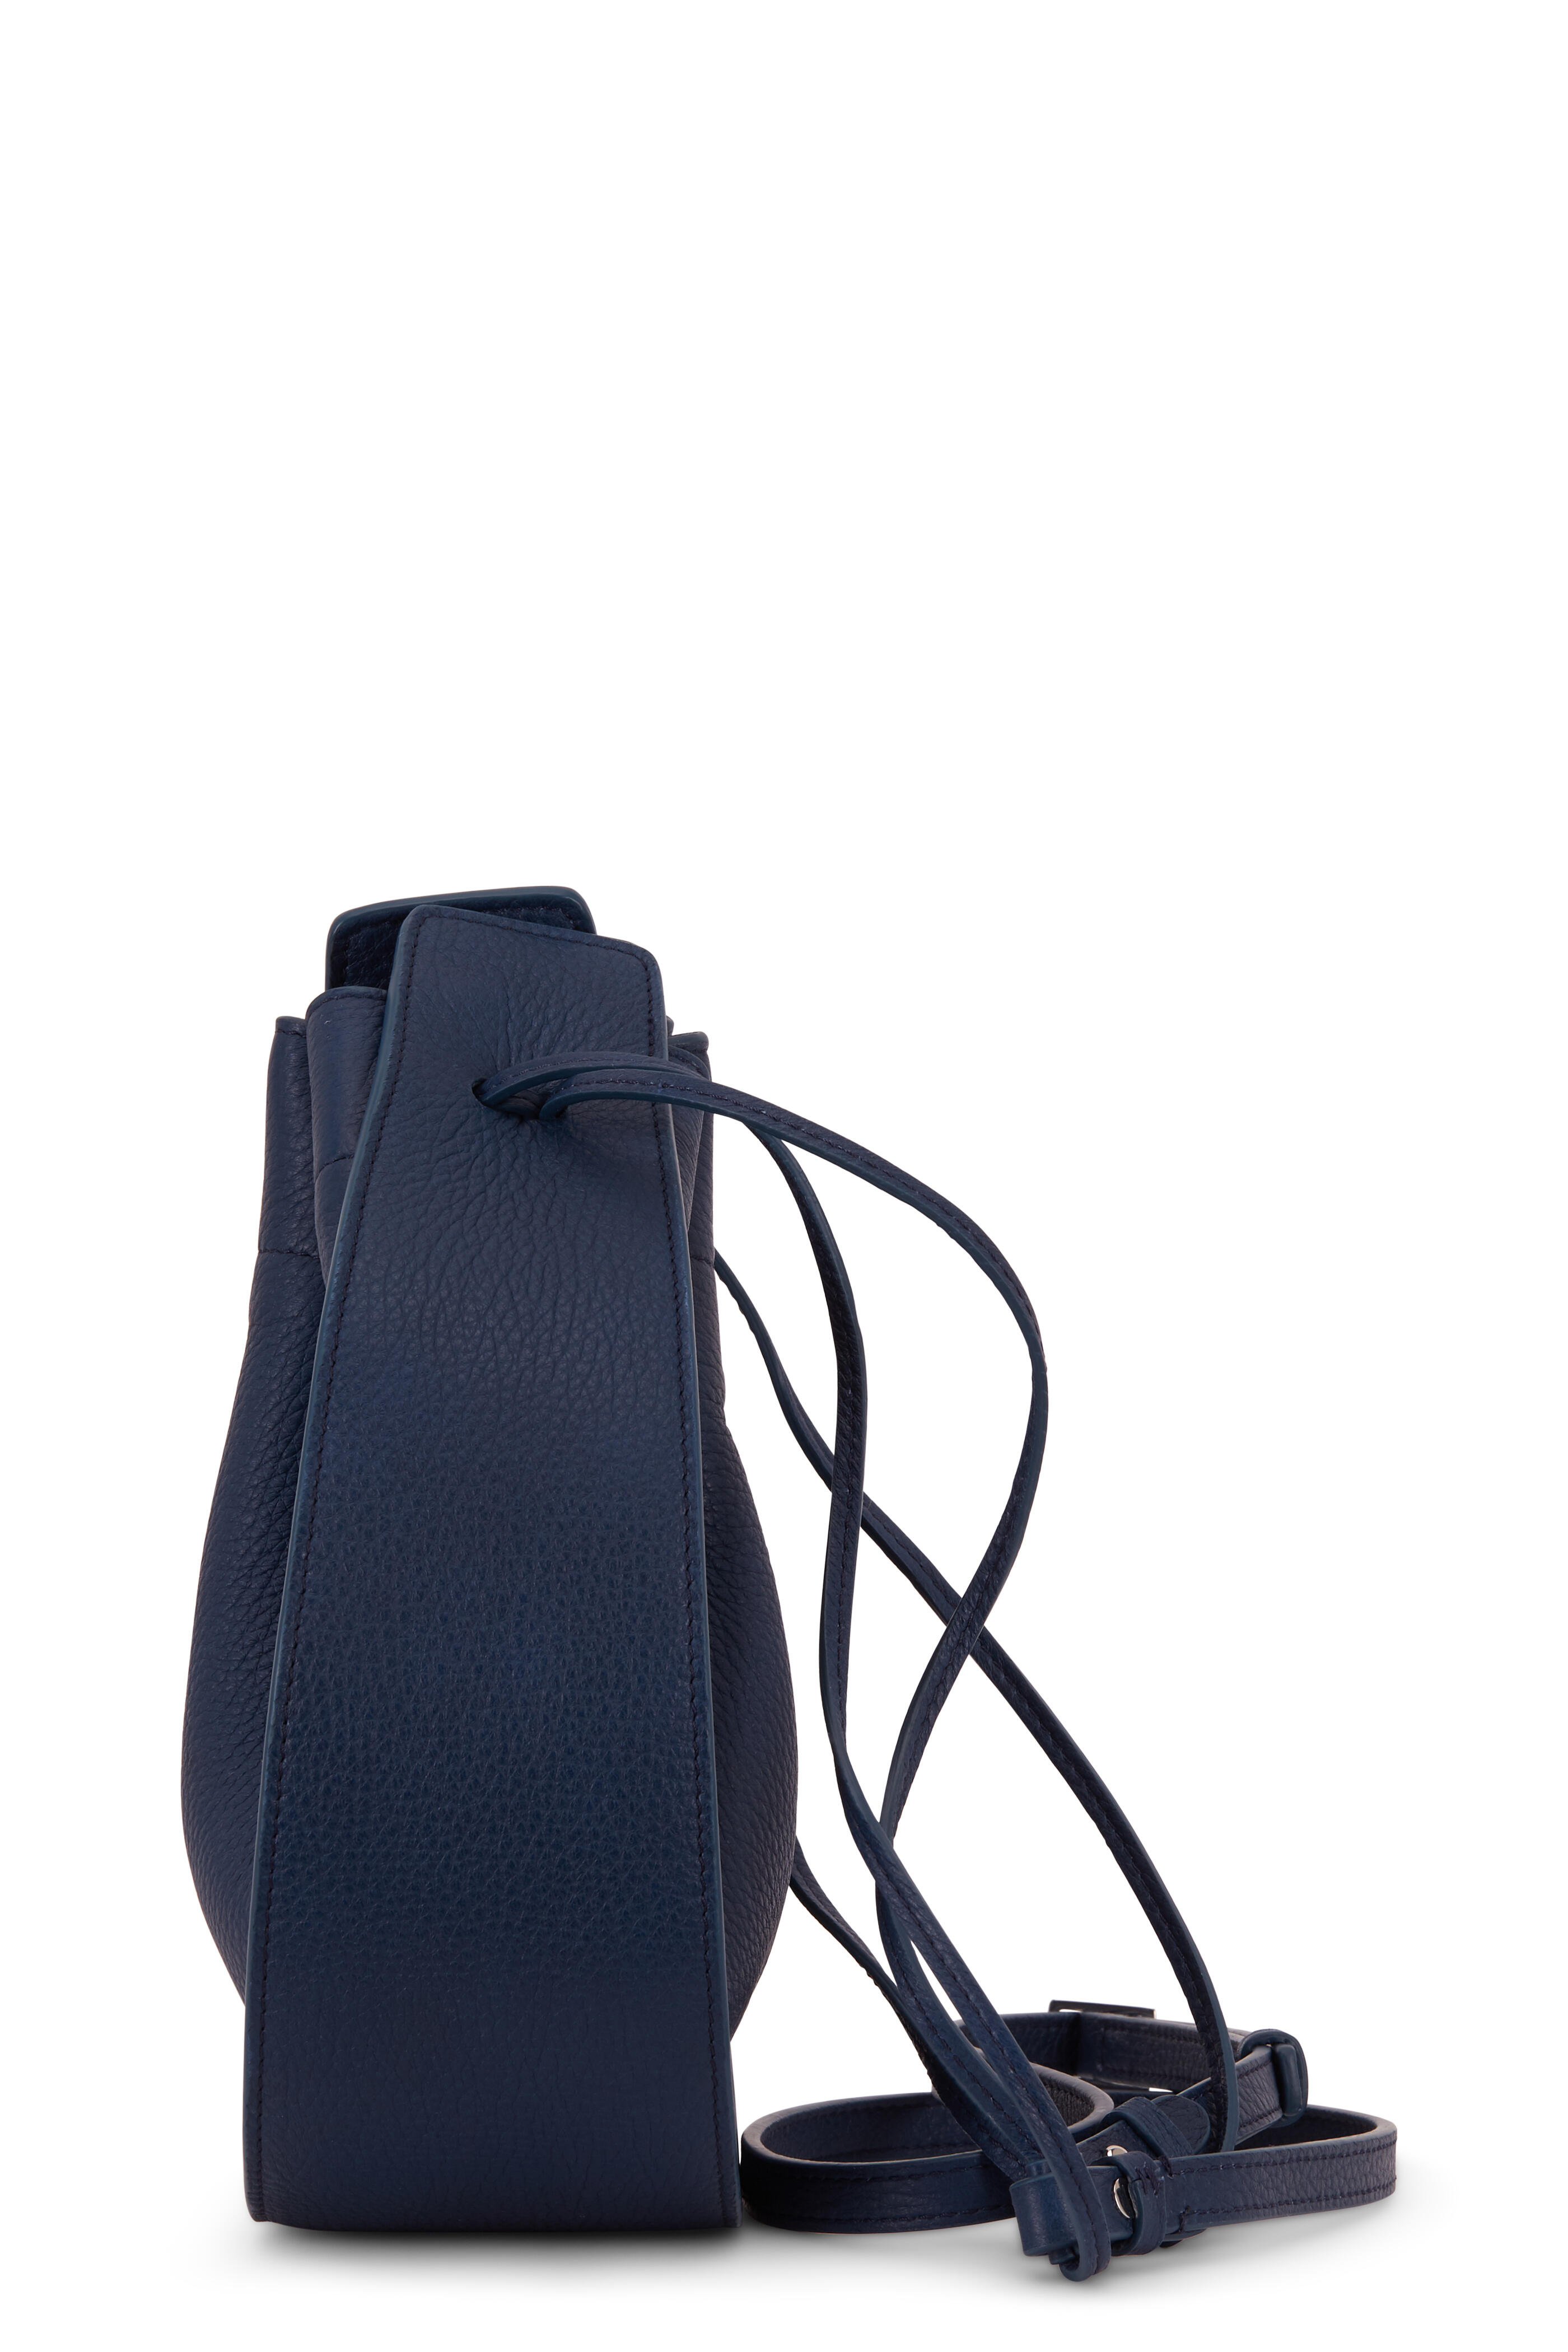 The Row - Marine Blue Leather Small Drawstring Pouch